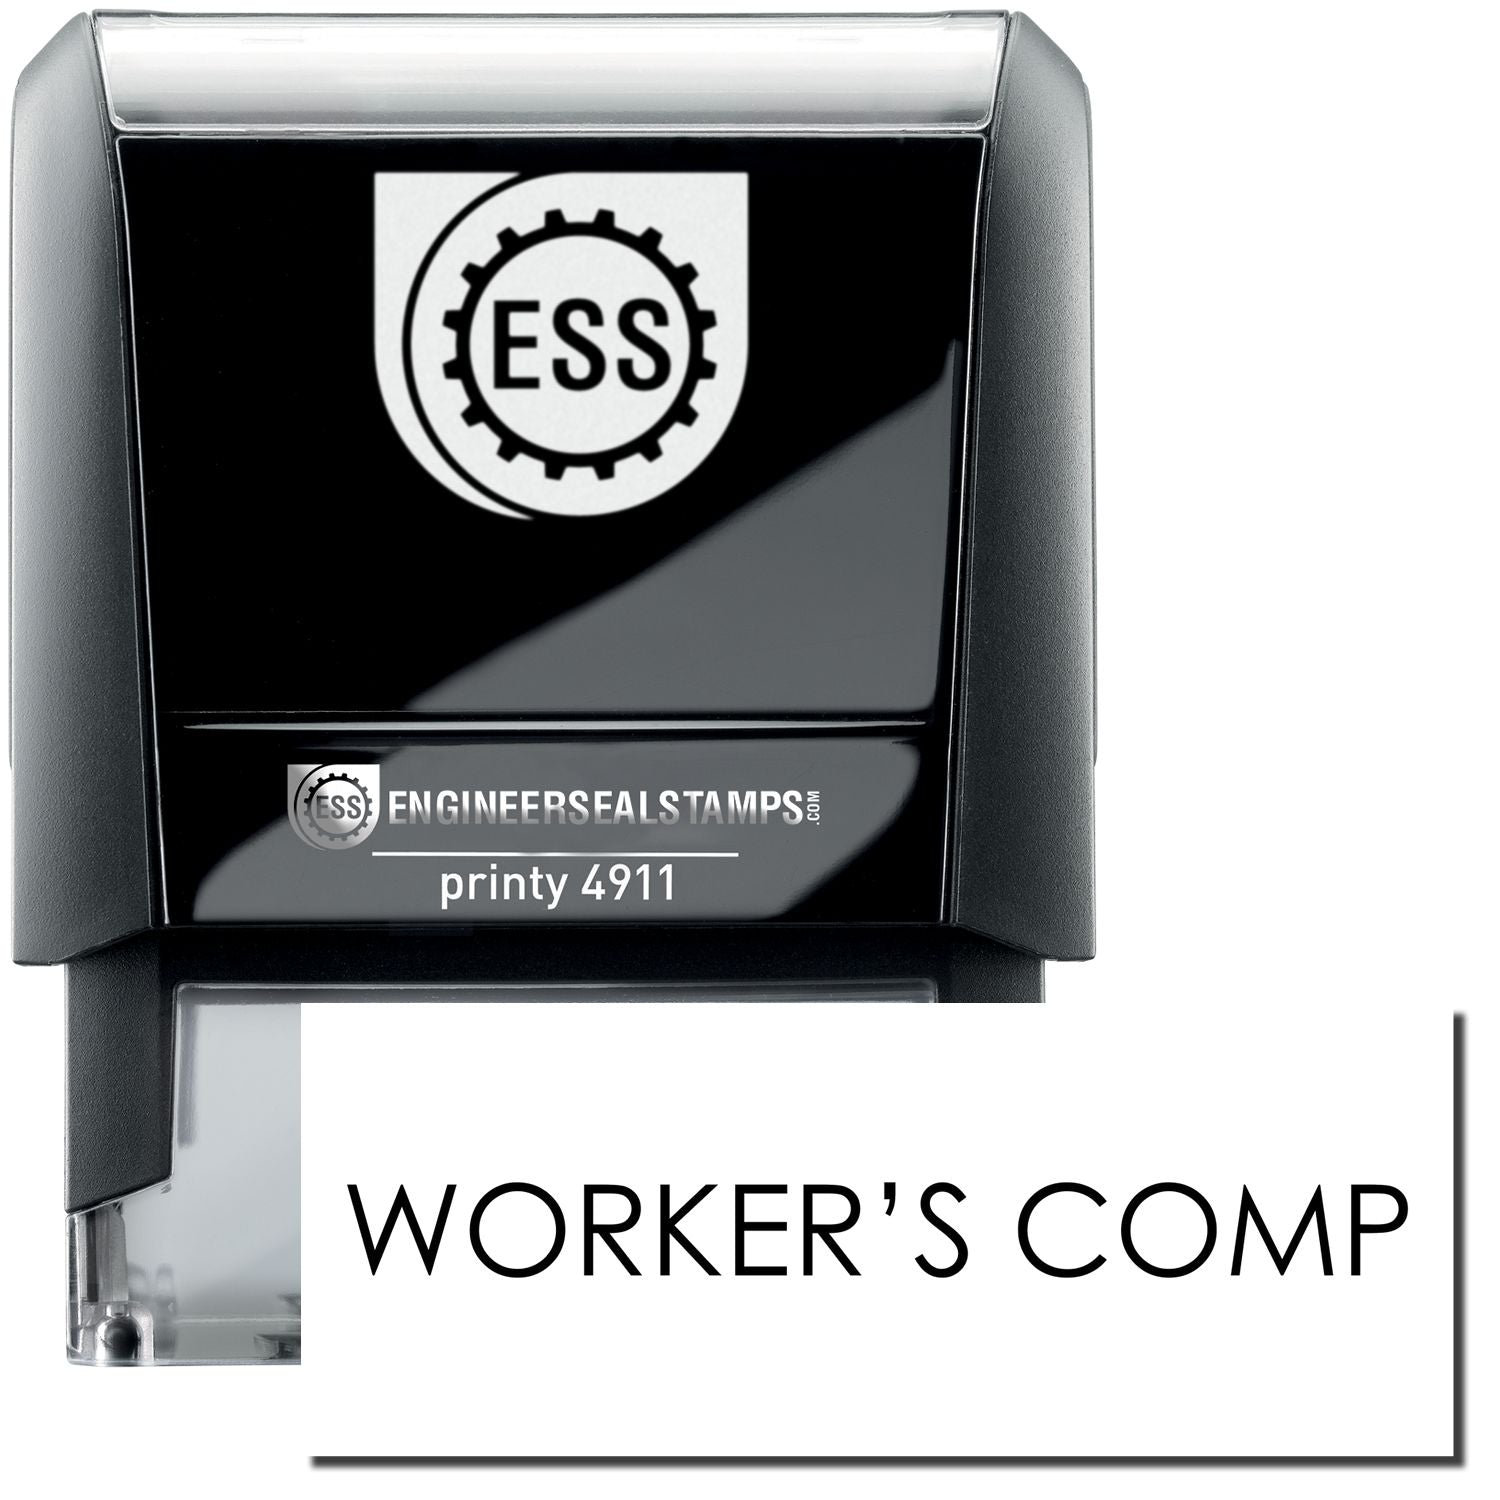 A self-inking stamp with a stamped image showing how the text "WORKER'S COMP" is displayed after stamping.